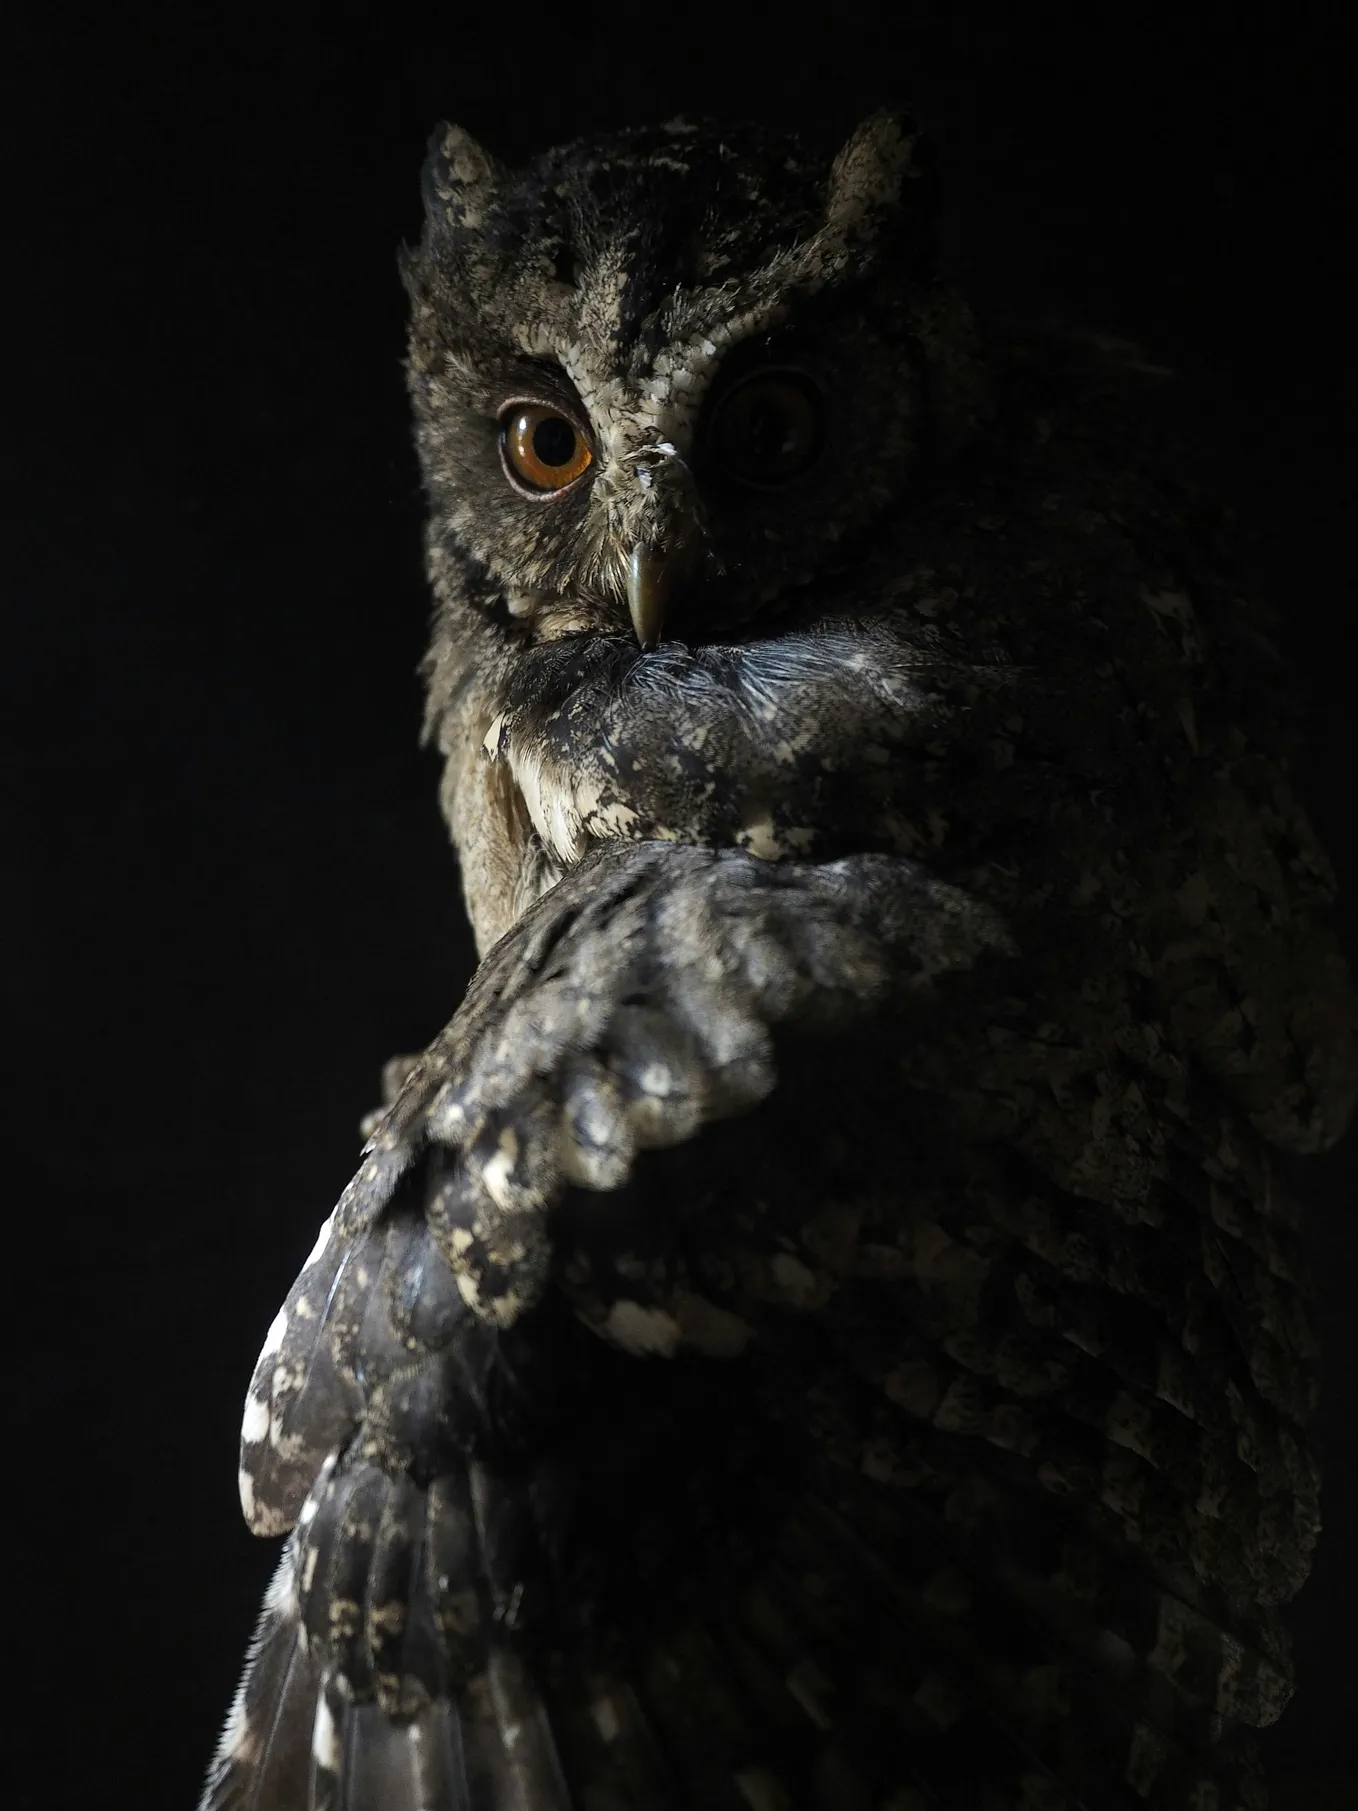 Night Owls Have a Cognitive Edge: New Research Shows How Your Chronotype Impacts Brainpower